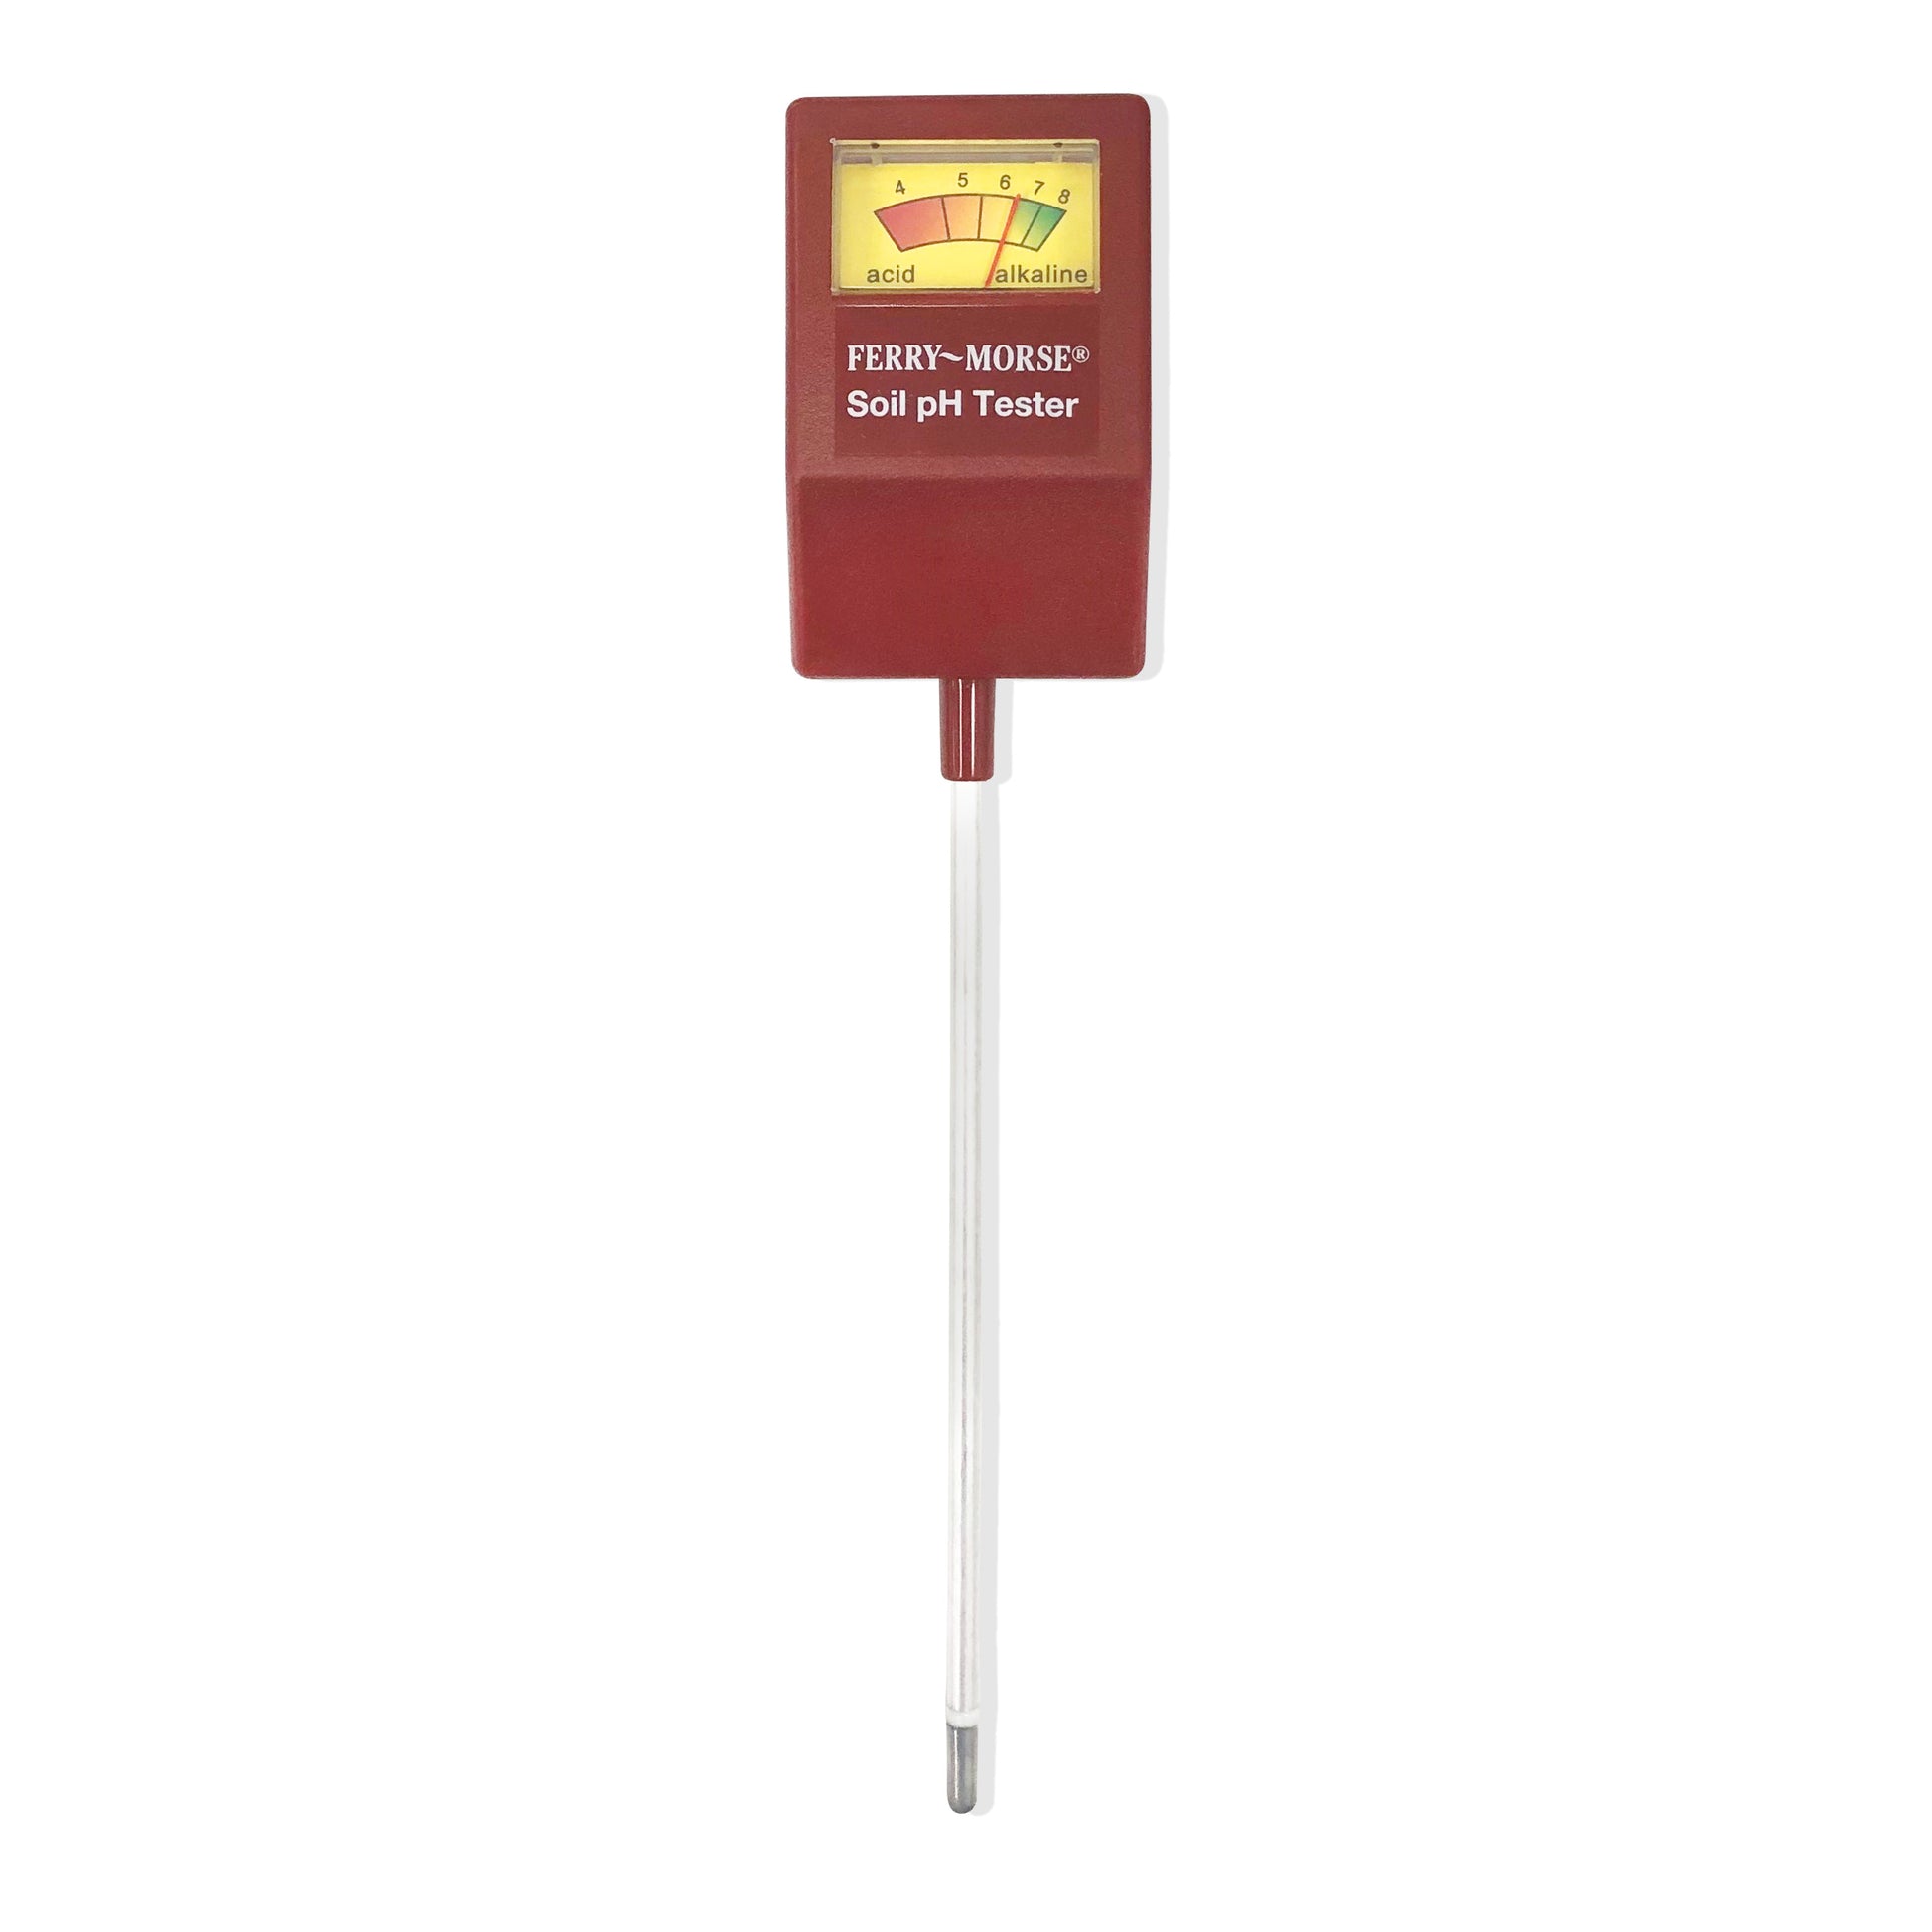 Ferry-Morse Soil pH Tester with Acid and Alkaline Meter Reader -- easy to use and read.